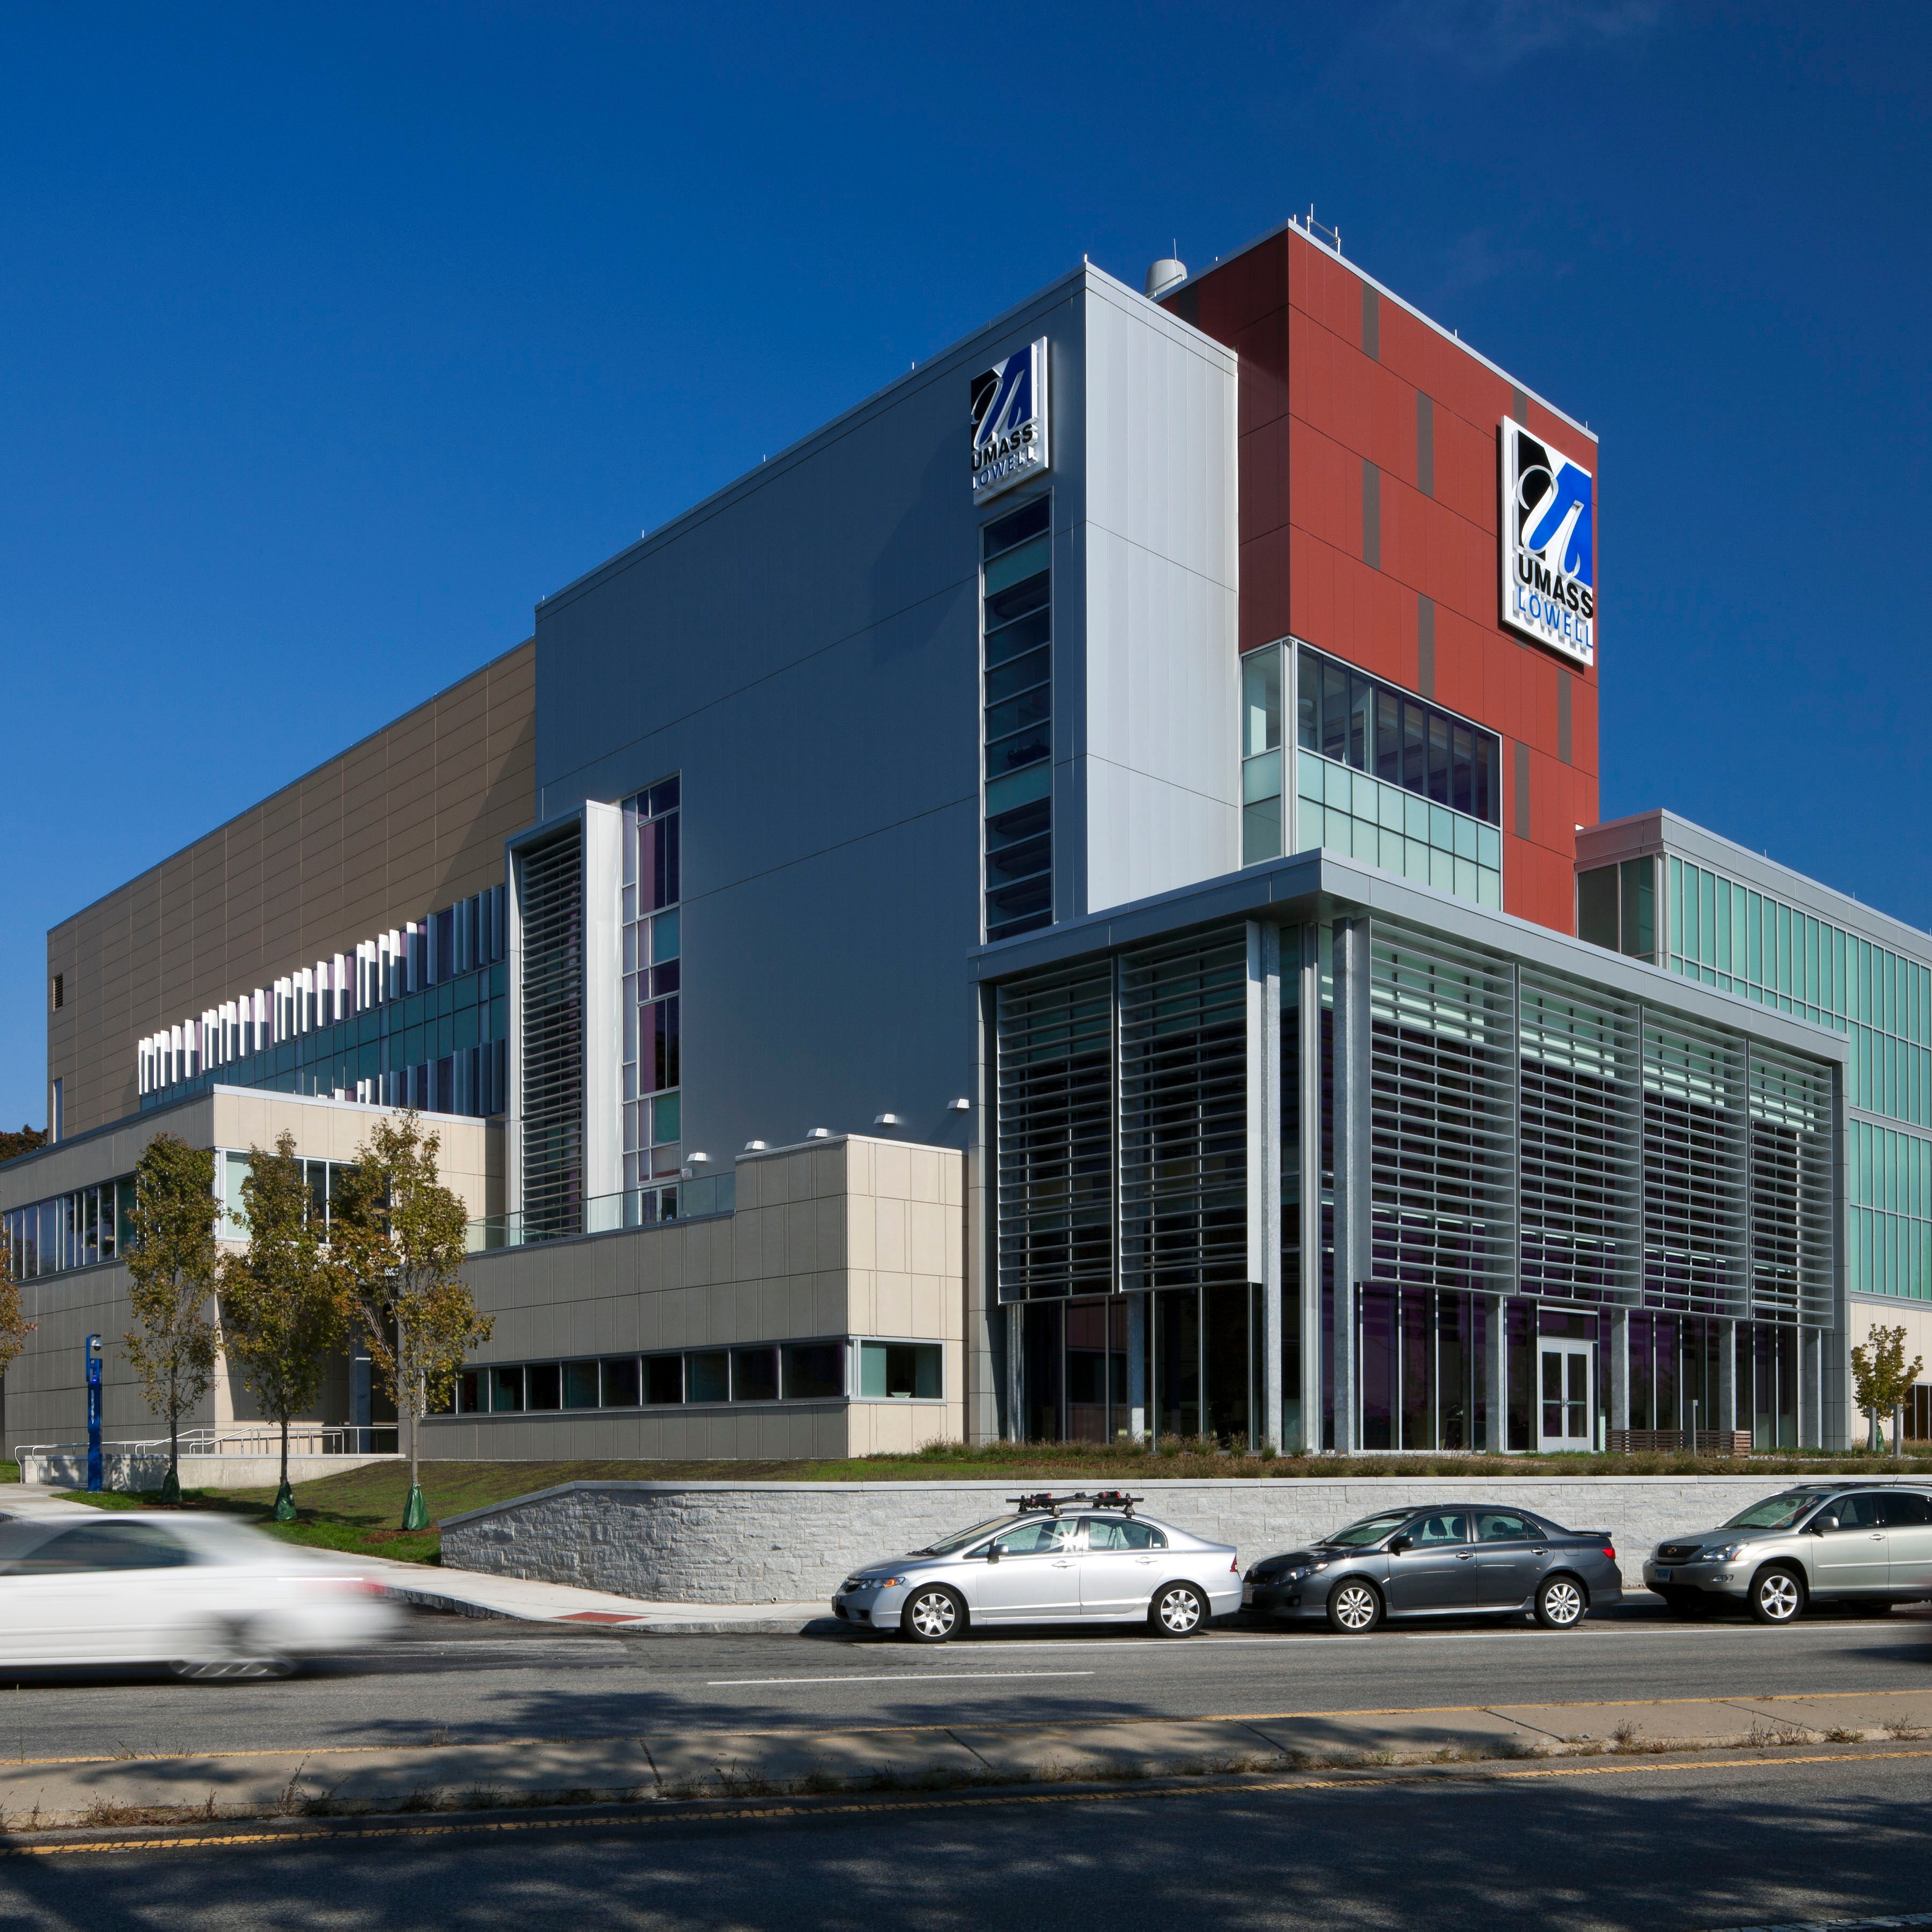 UMass Lowell Emerging Technologies and Innovation Center HDR